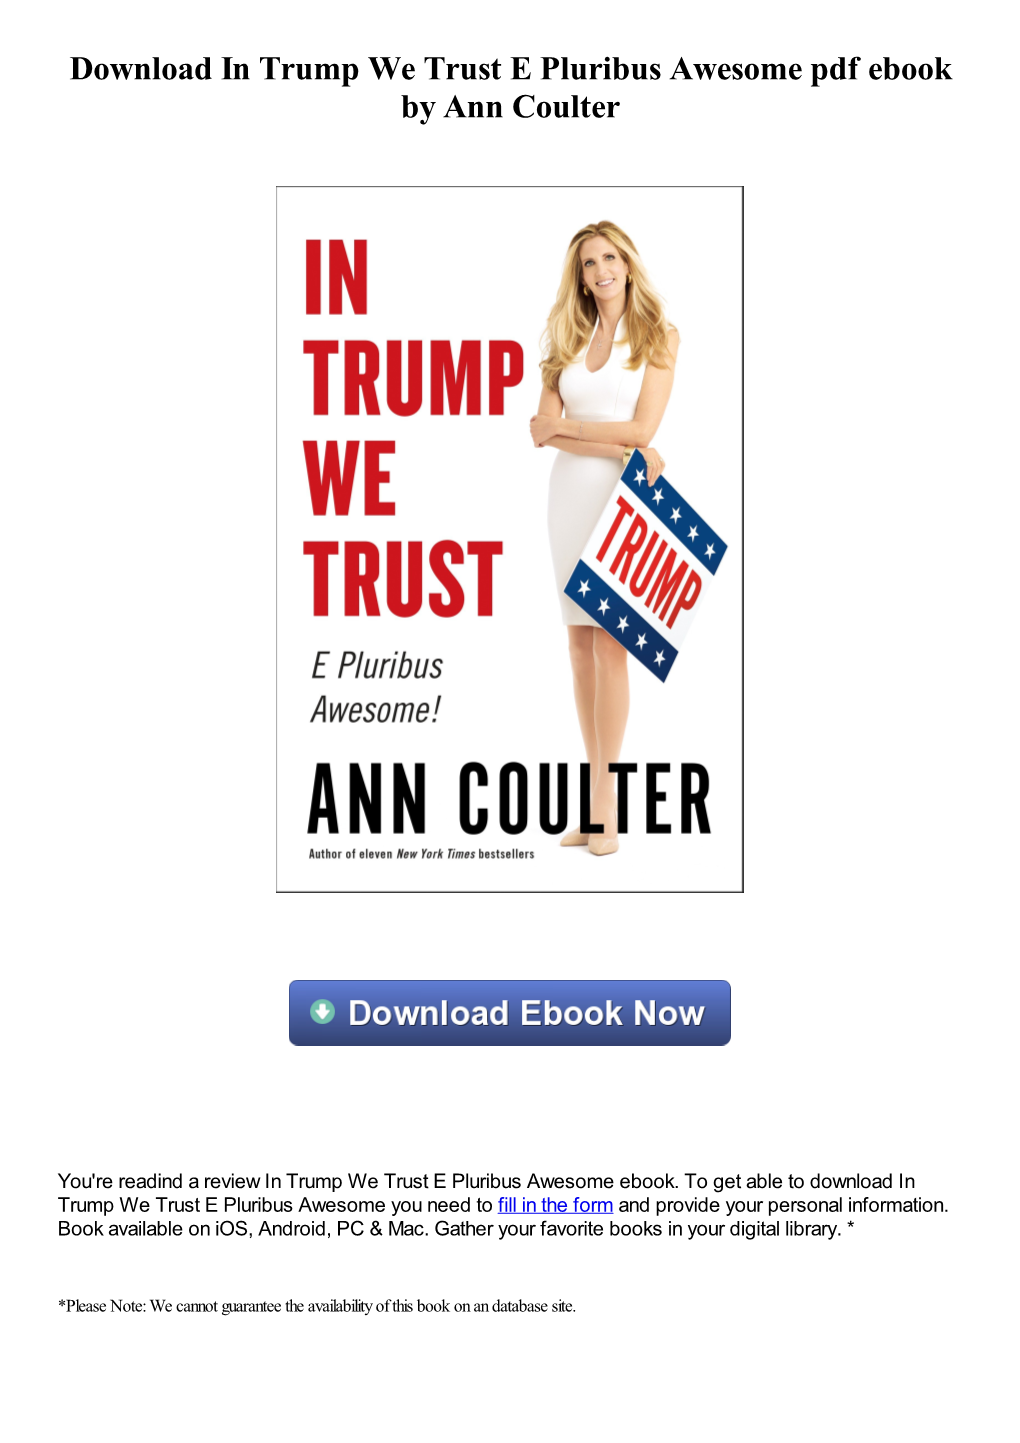 Download in Trump We Trust E Pluribus Awesome Pdf Book by Ann